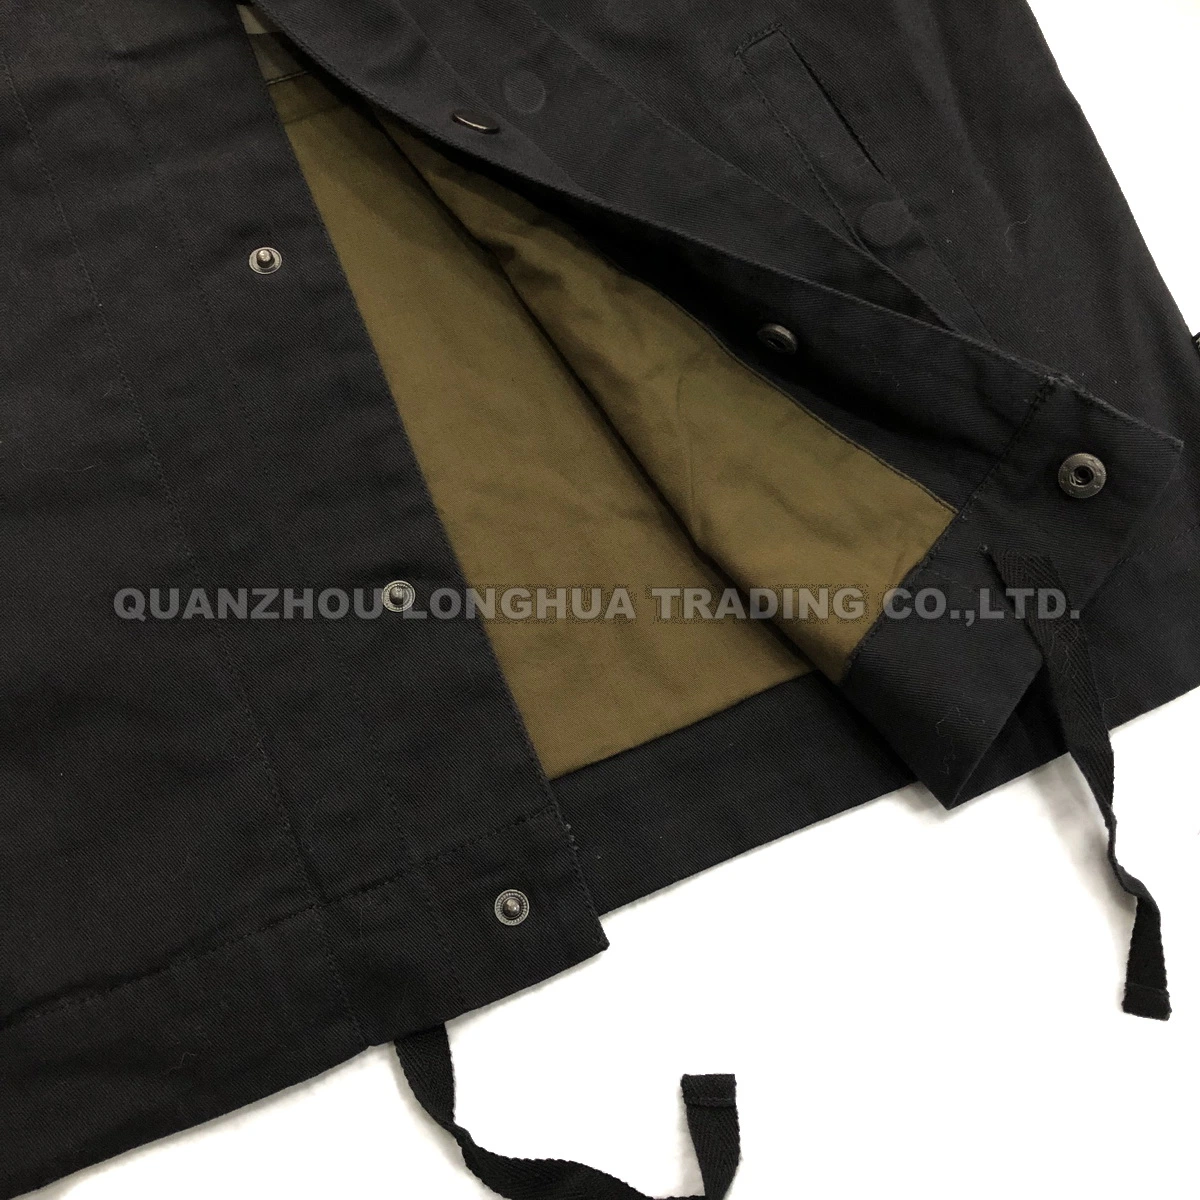 Men Jacket Boys Jacket Cotton Garment Enzyme Wash Clothes with Buttons Black Fashion Clothing Outdoor Apparel